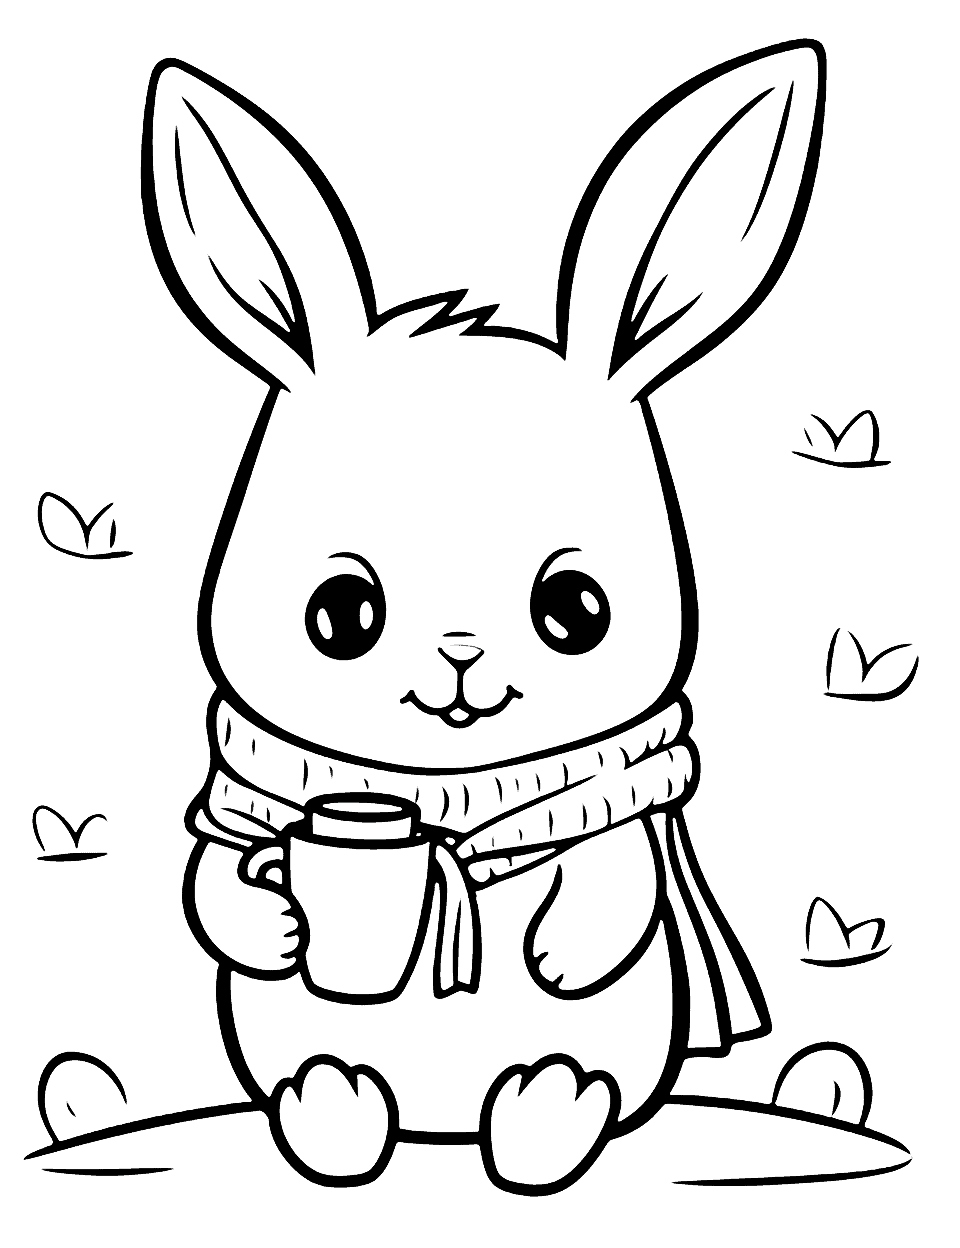 Bunny’s Winter Scarf and Hot Cocoa Bunny Coloring Page - Feeling the winter chill, our bunny wraps up and sips on hot cocoa.